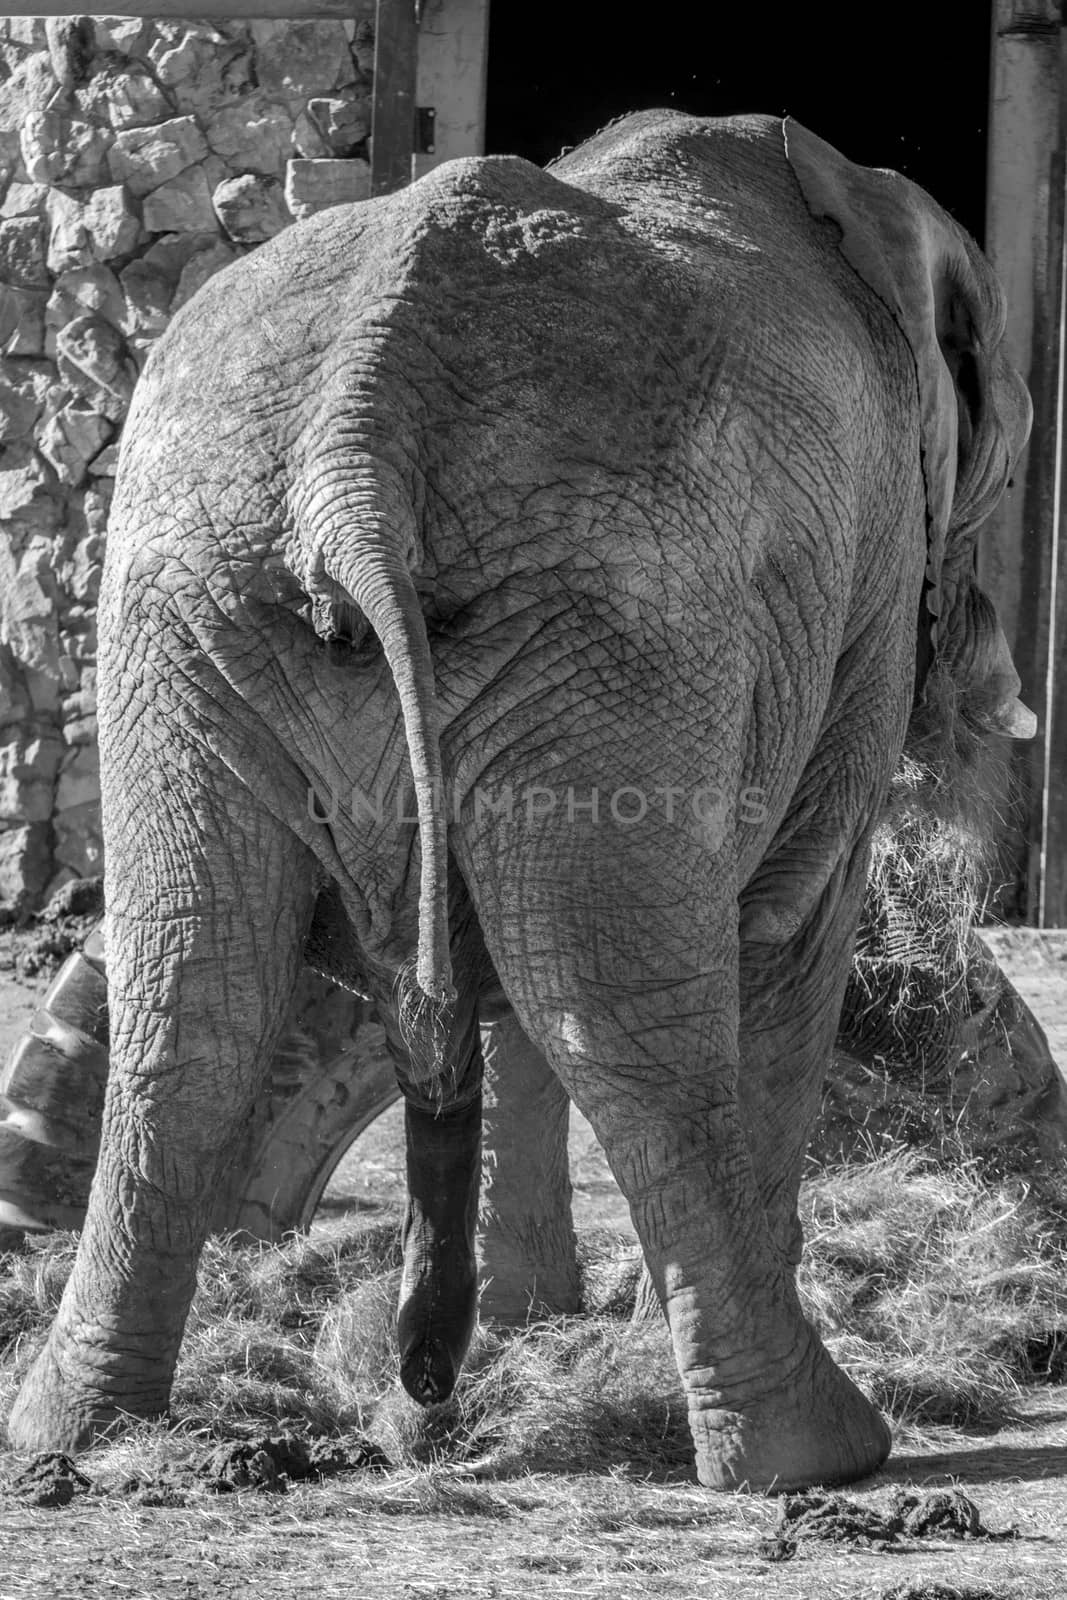 The view of the back of a big male elephant